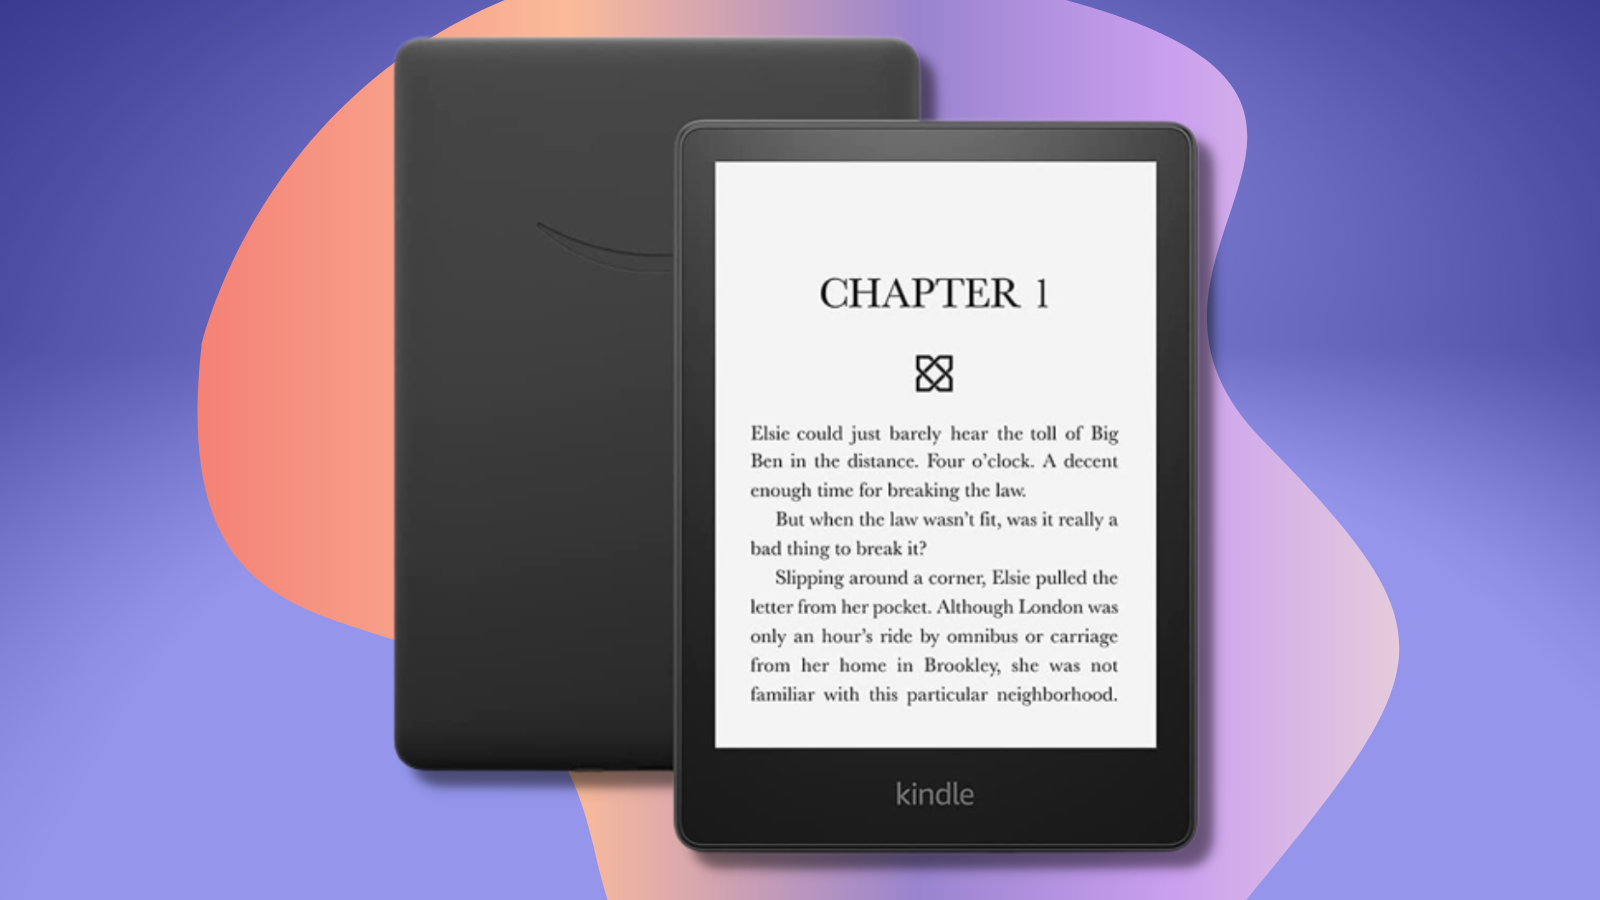 Amazon quietly released a new 16GB Kindle Paperwhite — and it’s the best bang for your buck